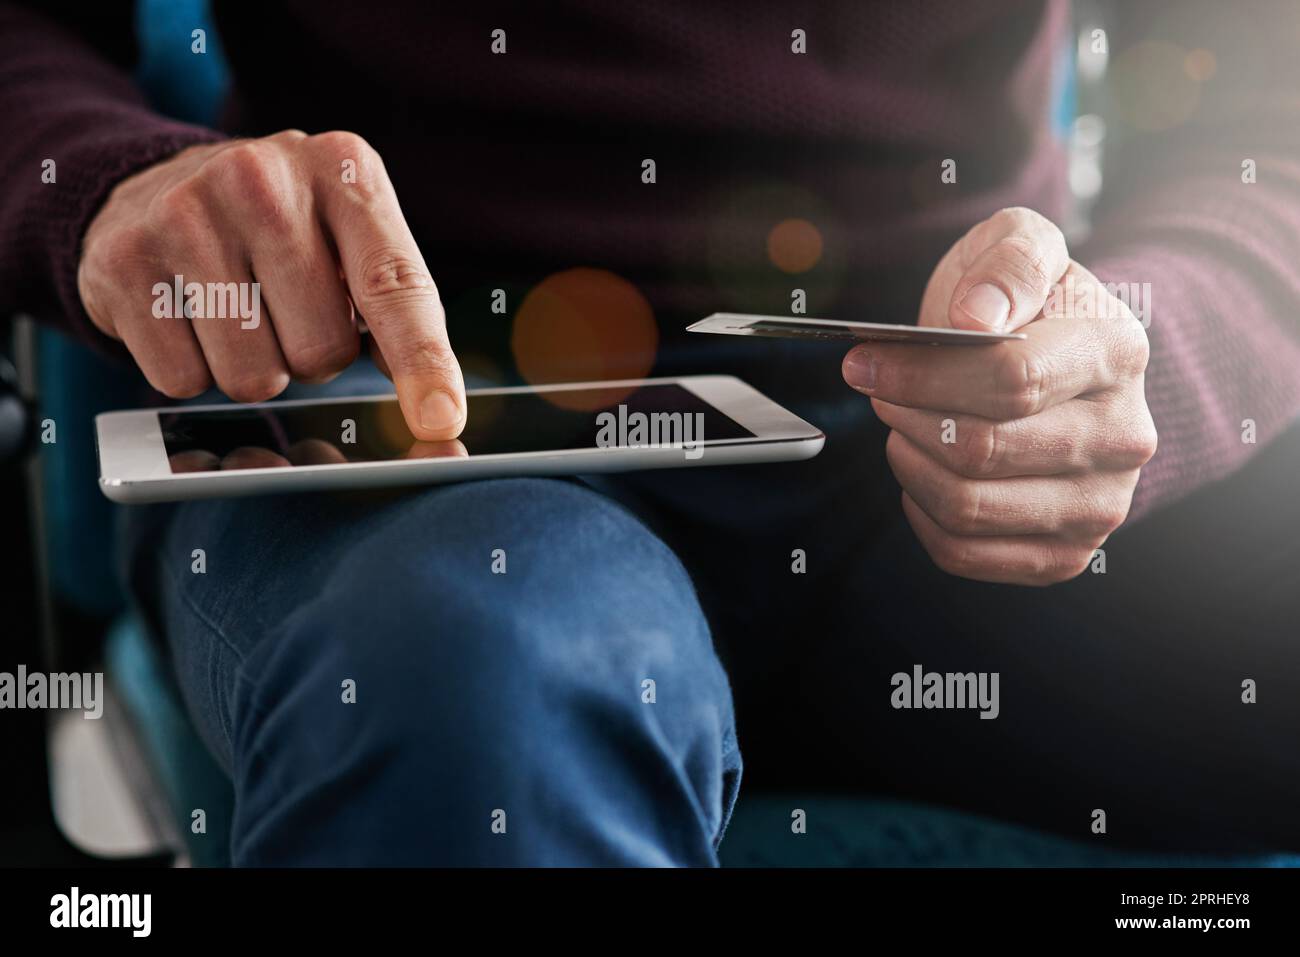 Paying for business resources using his credit card. a young man using a digital tablet in an office. Stock Photo